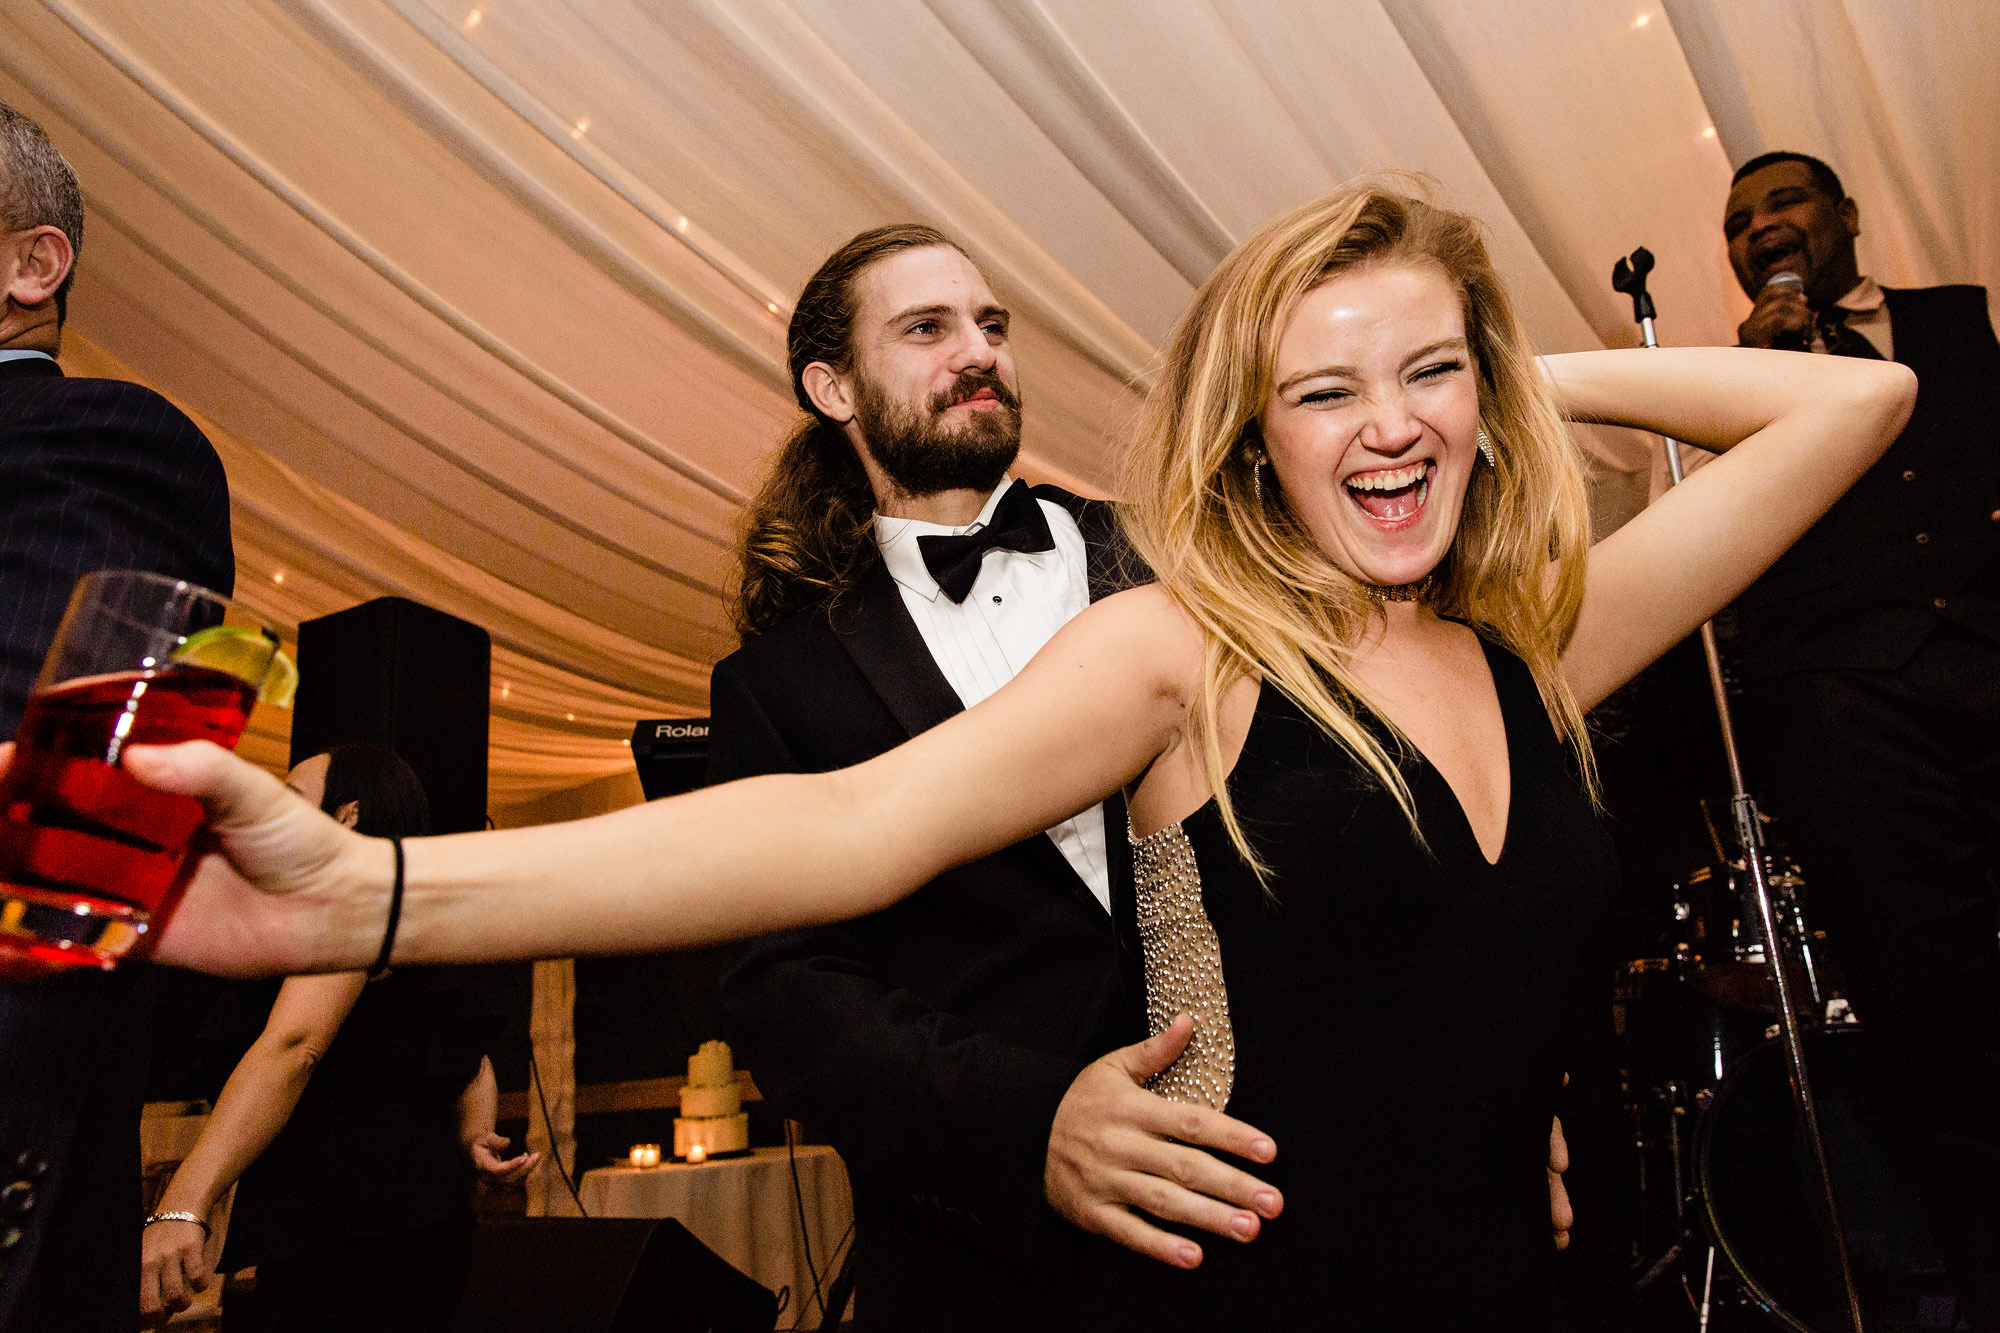 Candid photos of a wedding reception at a private residence in Blue Hill, Maine